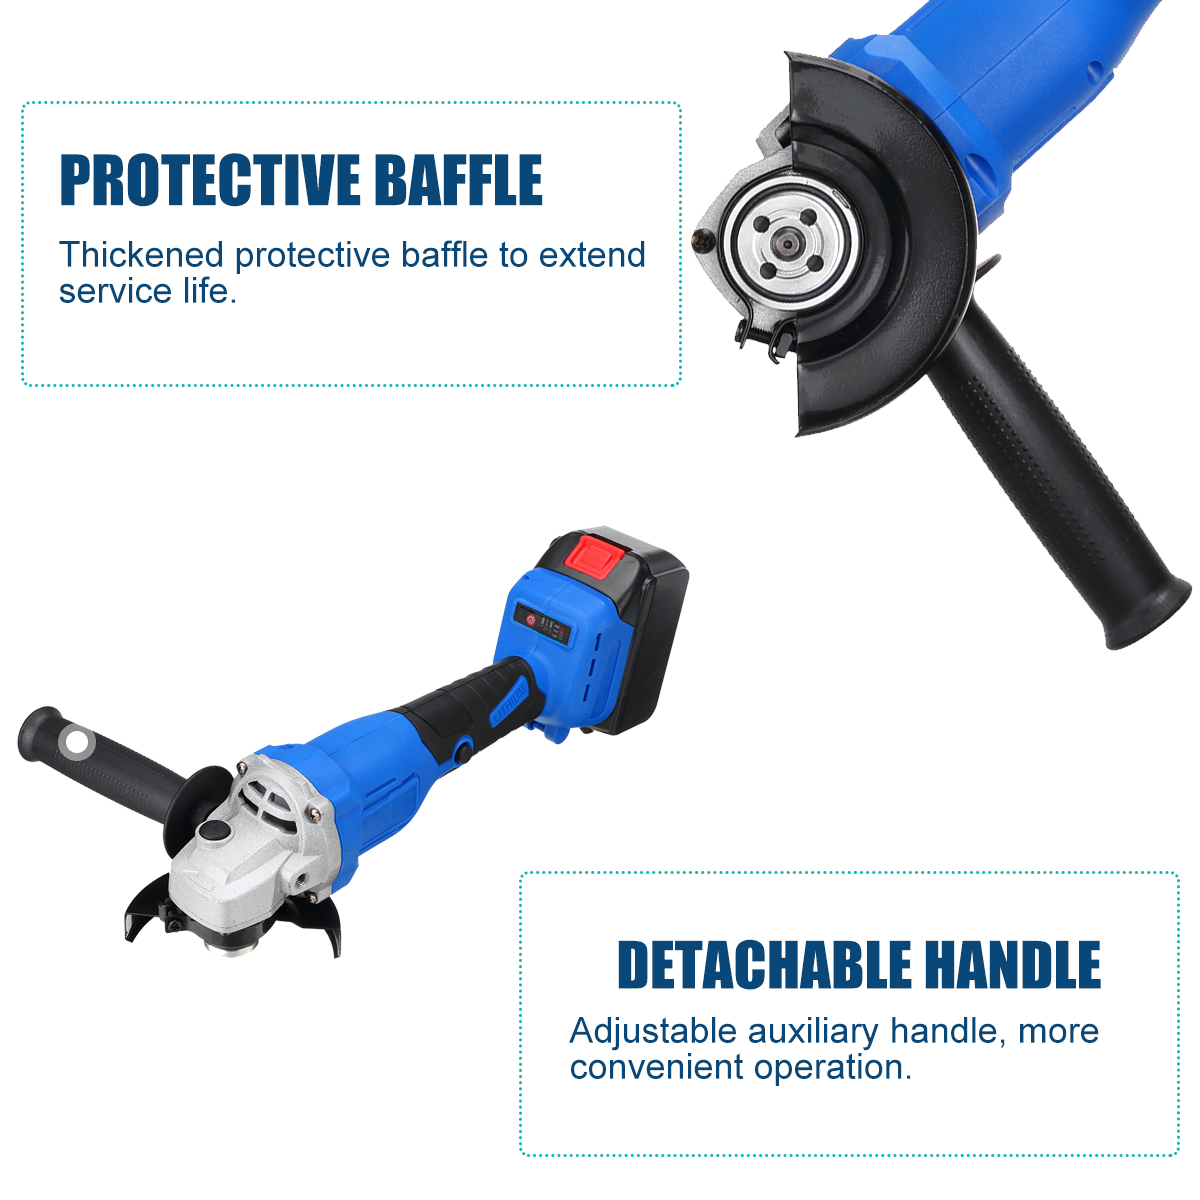 1500W-12000rpm-Brushless-Cordless-Angle-Grinder-Electric-Sander-Polishing-Machine-W-1-or-2-Battery-F-1873835-8